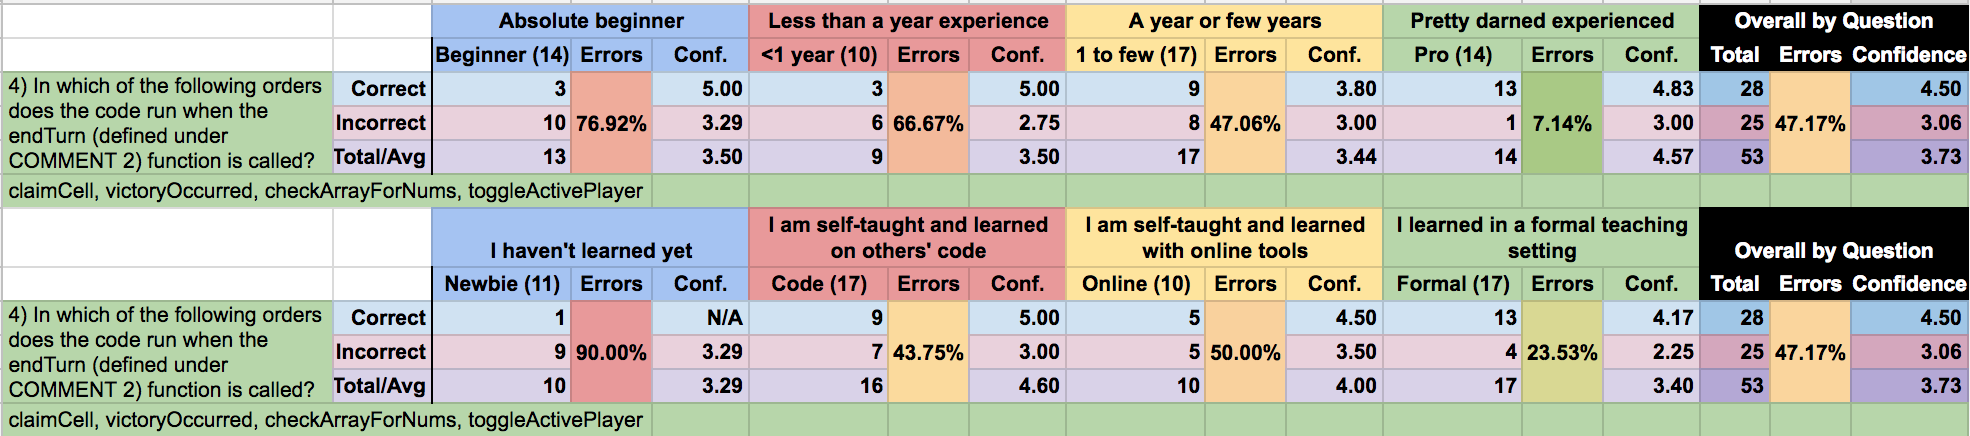 Correct answer rates for question 4 by experience level and learning type